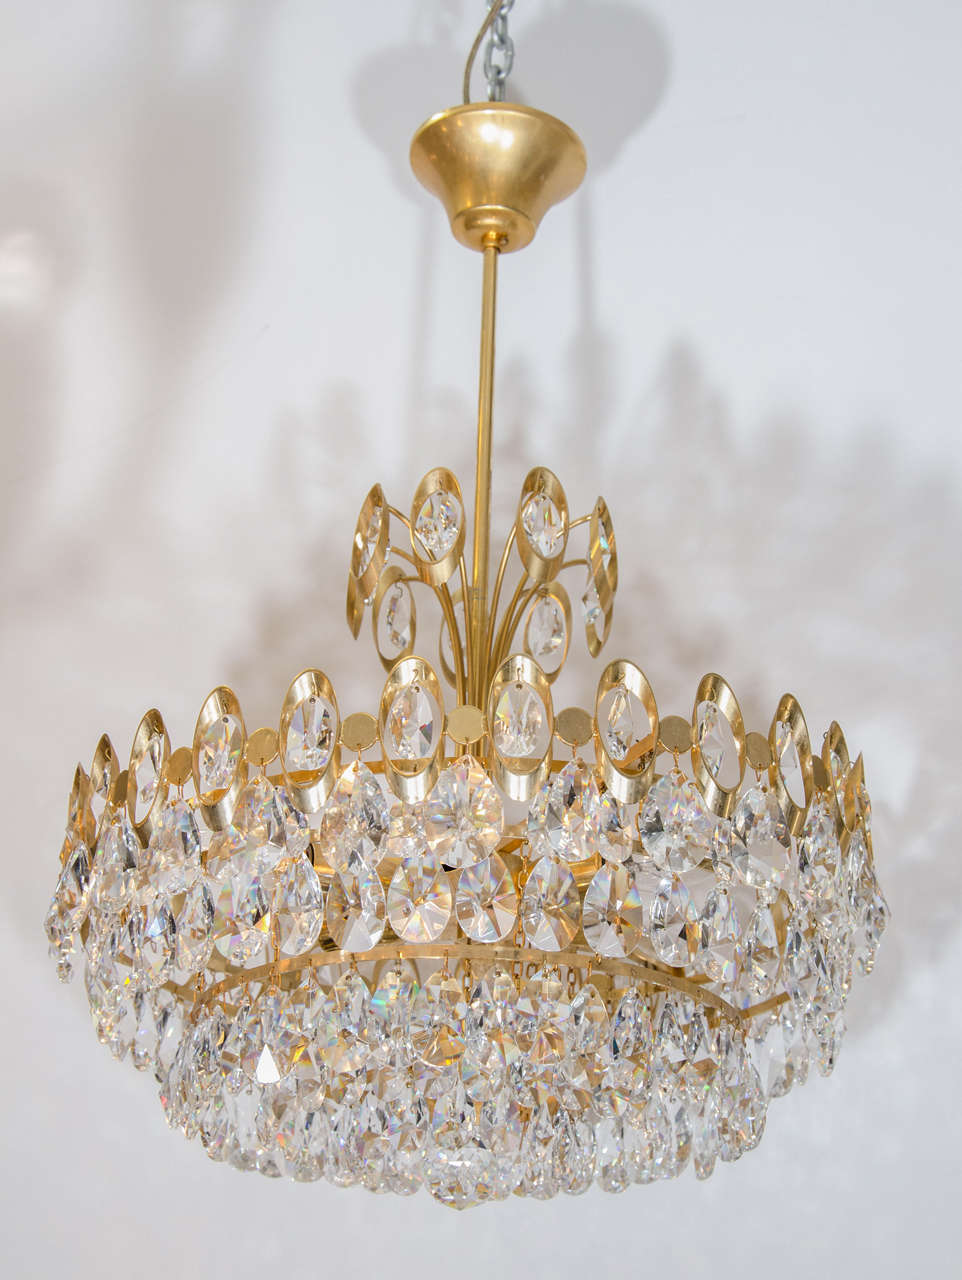 A vintage 1950s Italian chandelier in the style of Sciolari in brass, trimmed with Austrian crystals. Newly rewired.